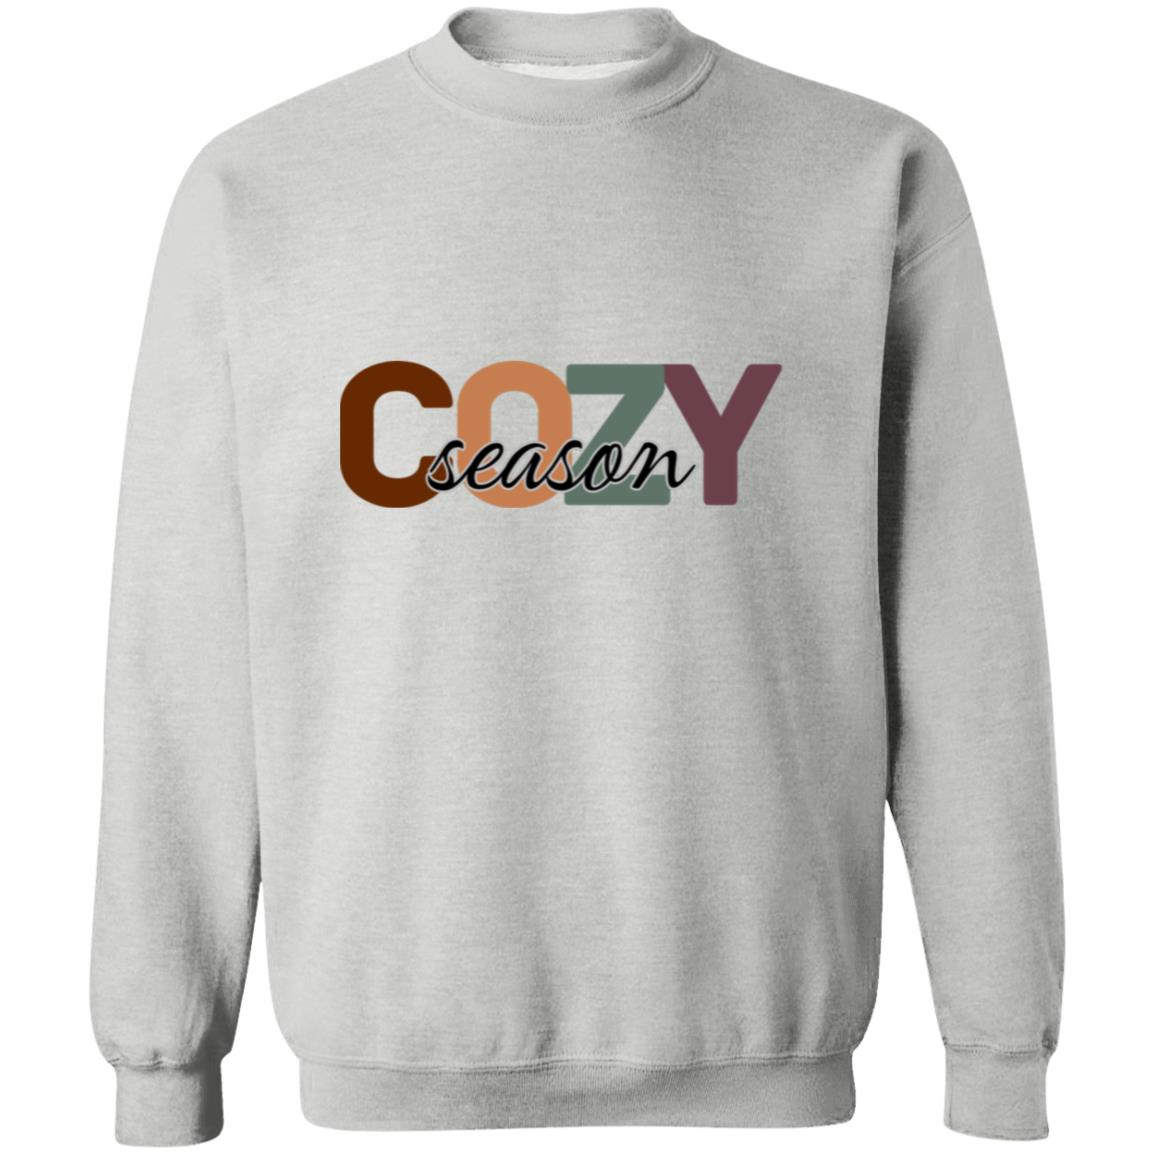 Get trendy with Cozy Season Crewneck Pullover Sweatshirt - Sweatshirts available at Good Gift Company. Grab yours for $21.95 today!